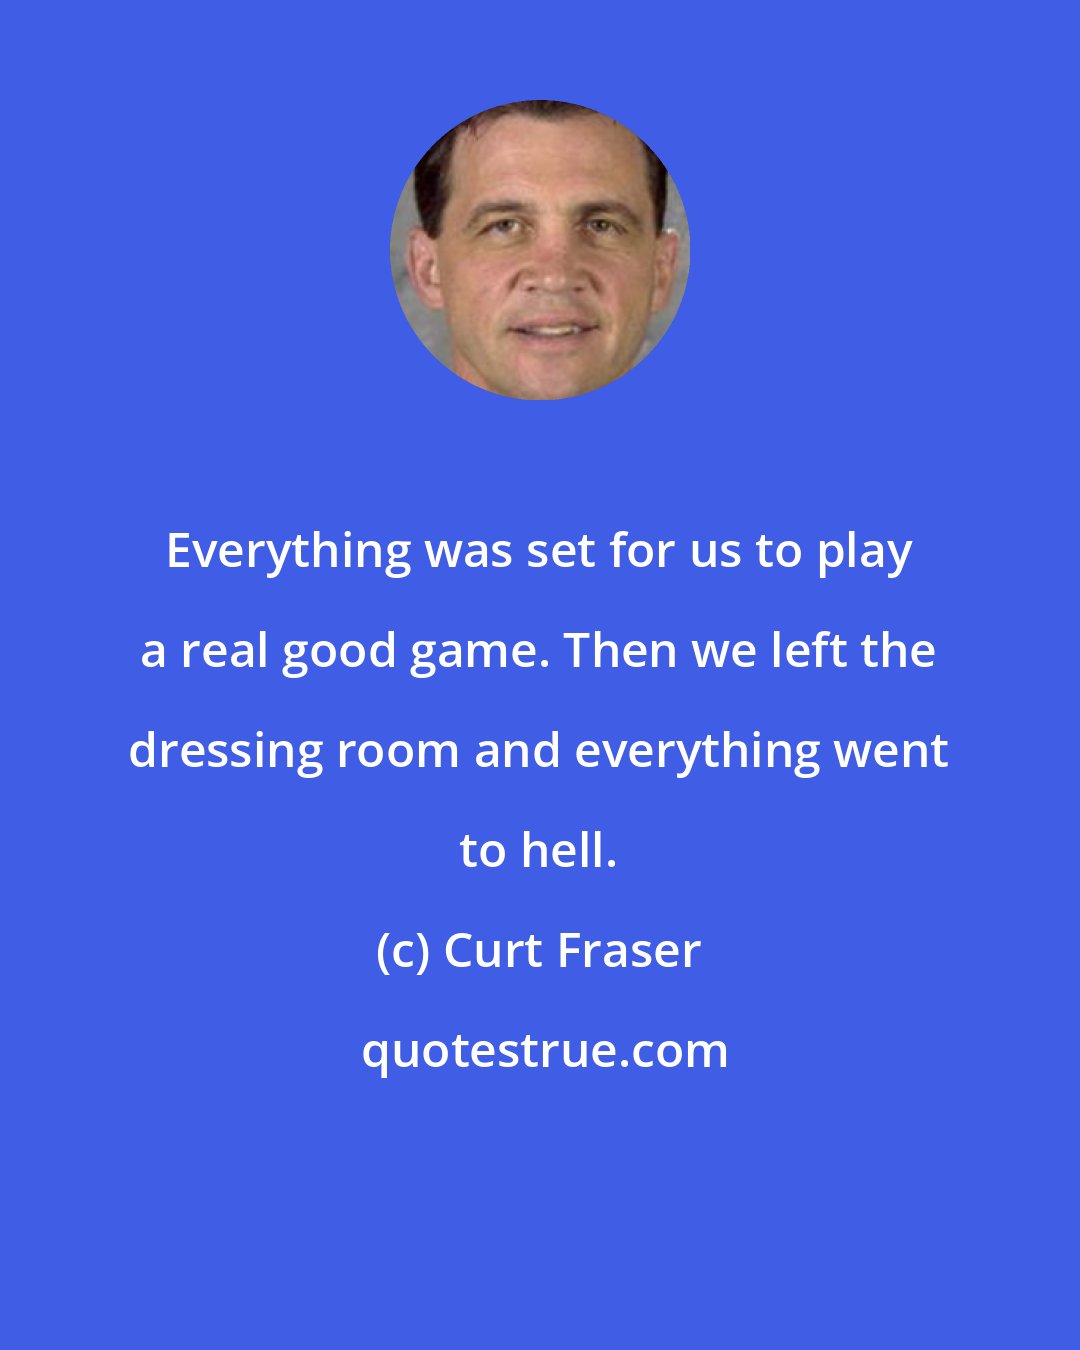 Curt Fraser: Everything was set for us to play a real good game. Then we left the dressing room and everything went to hell.